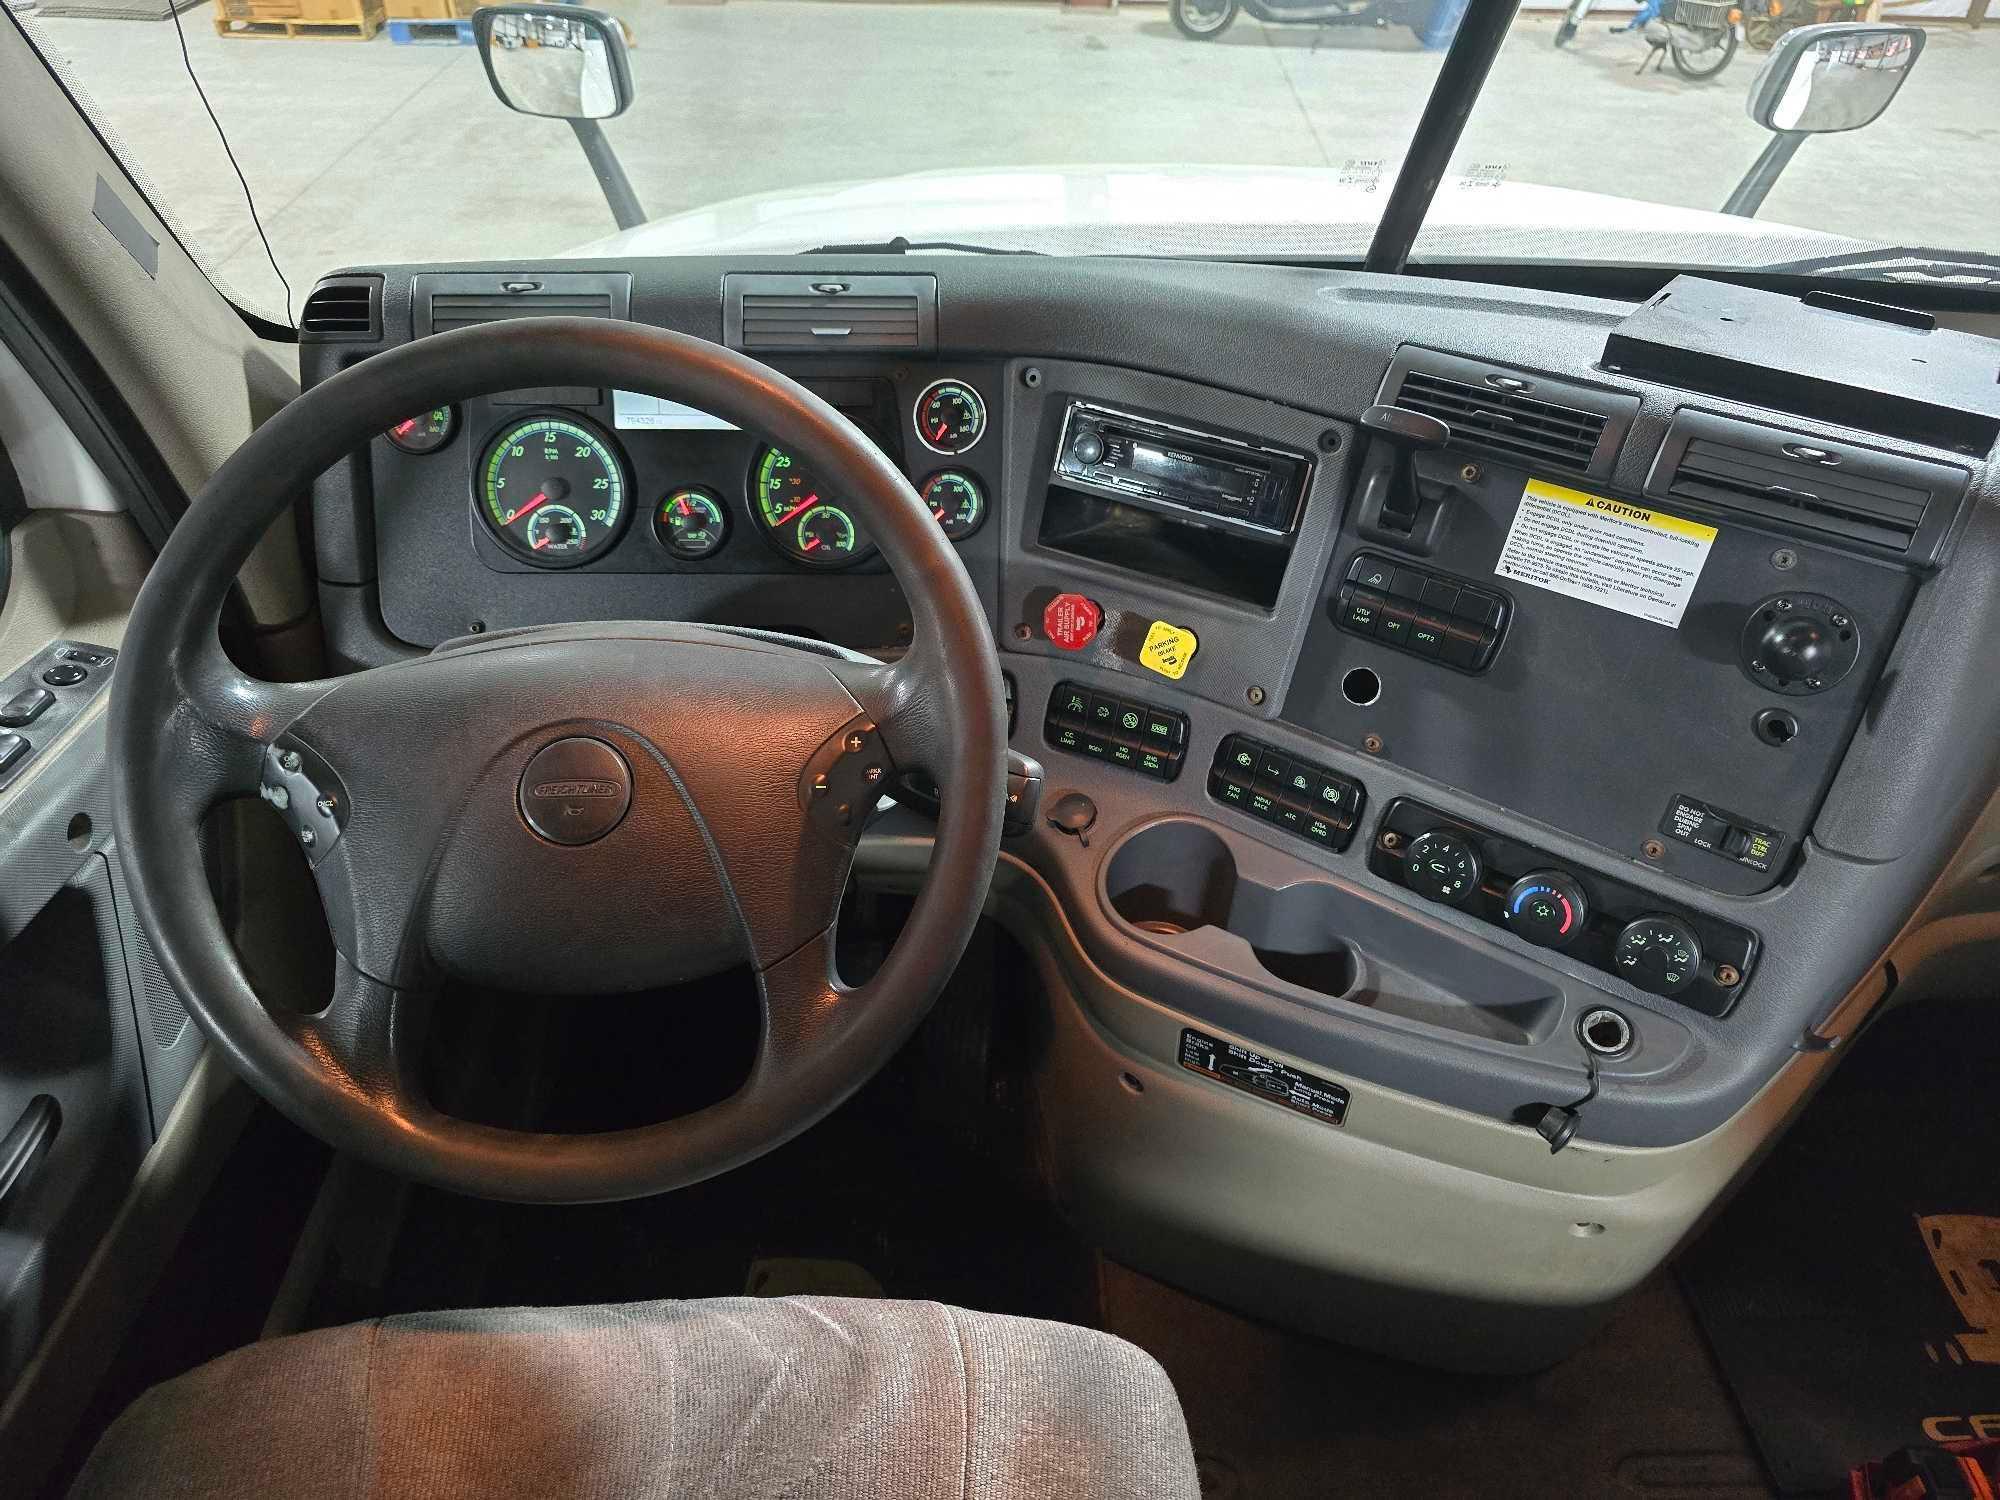 2016 Freightliner Cascadia 125 Day Cab Truck Tractor